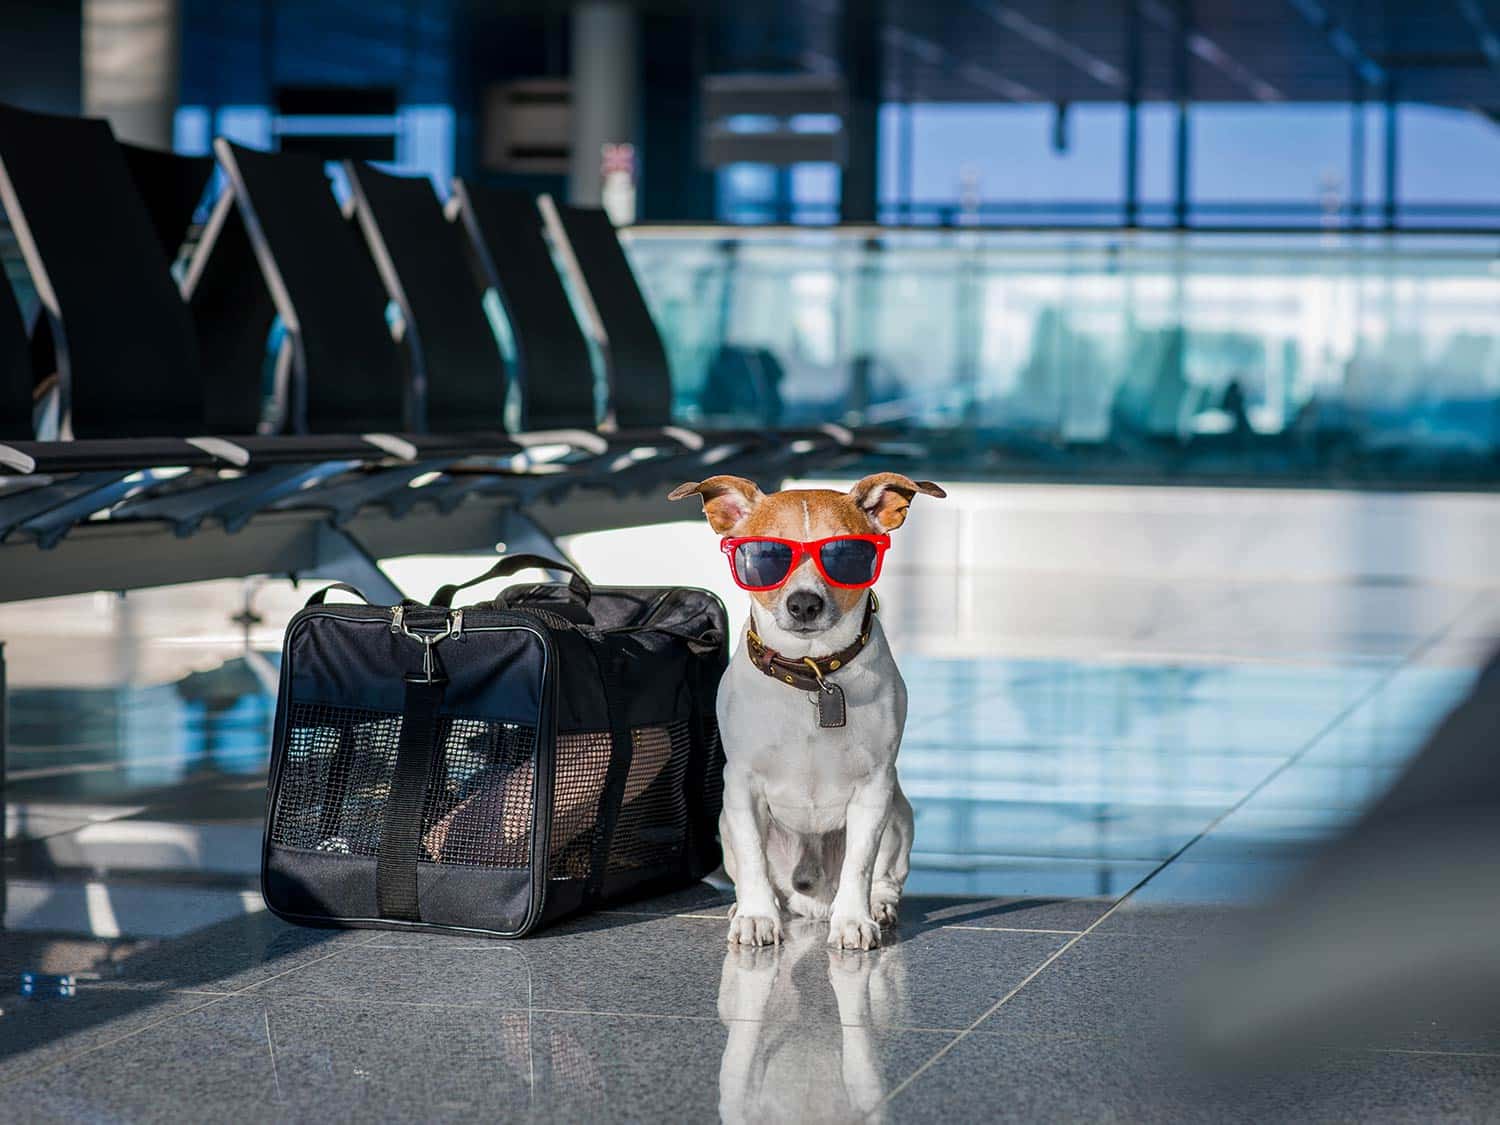 Dogs wearing sunglasses in the airport